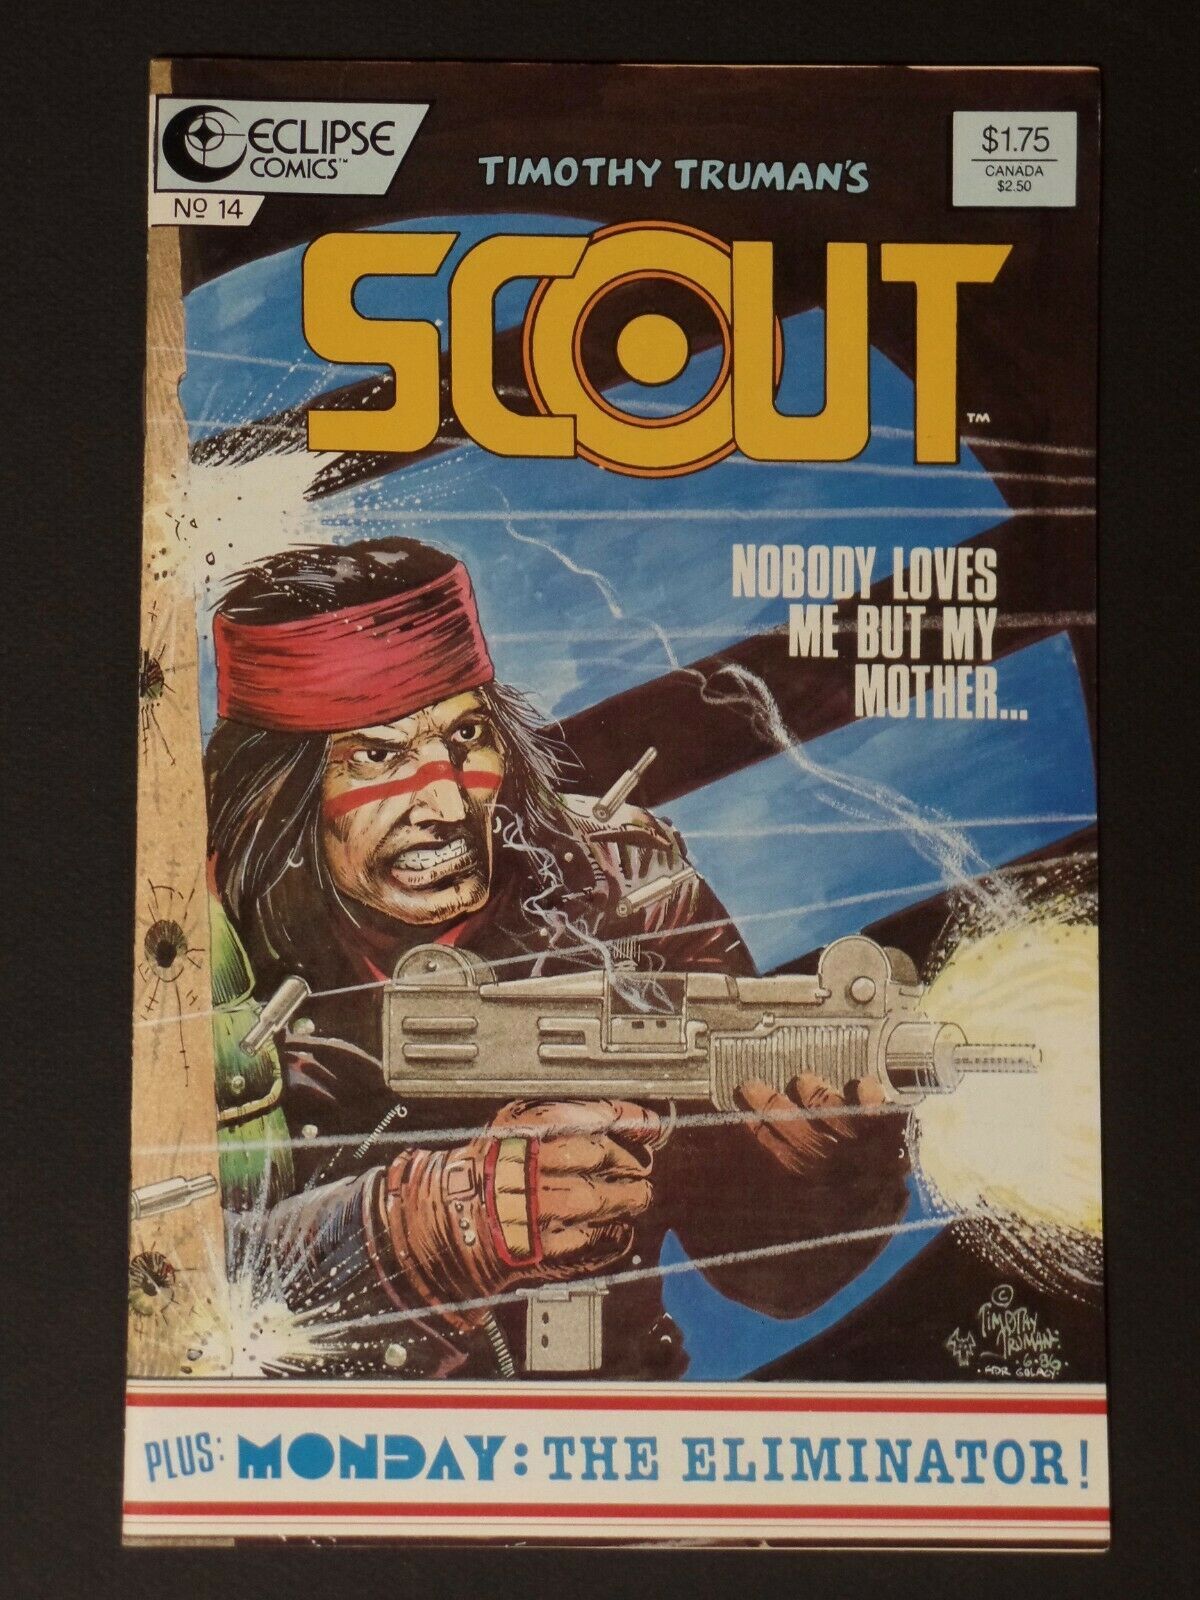 Primary image for Scout #14, Eclipse Comics